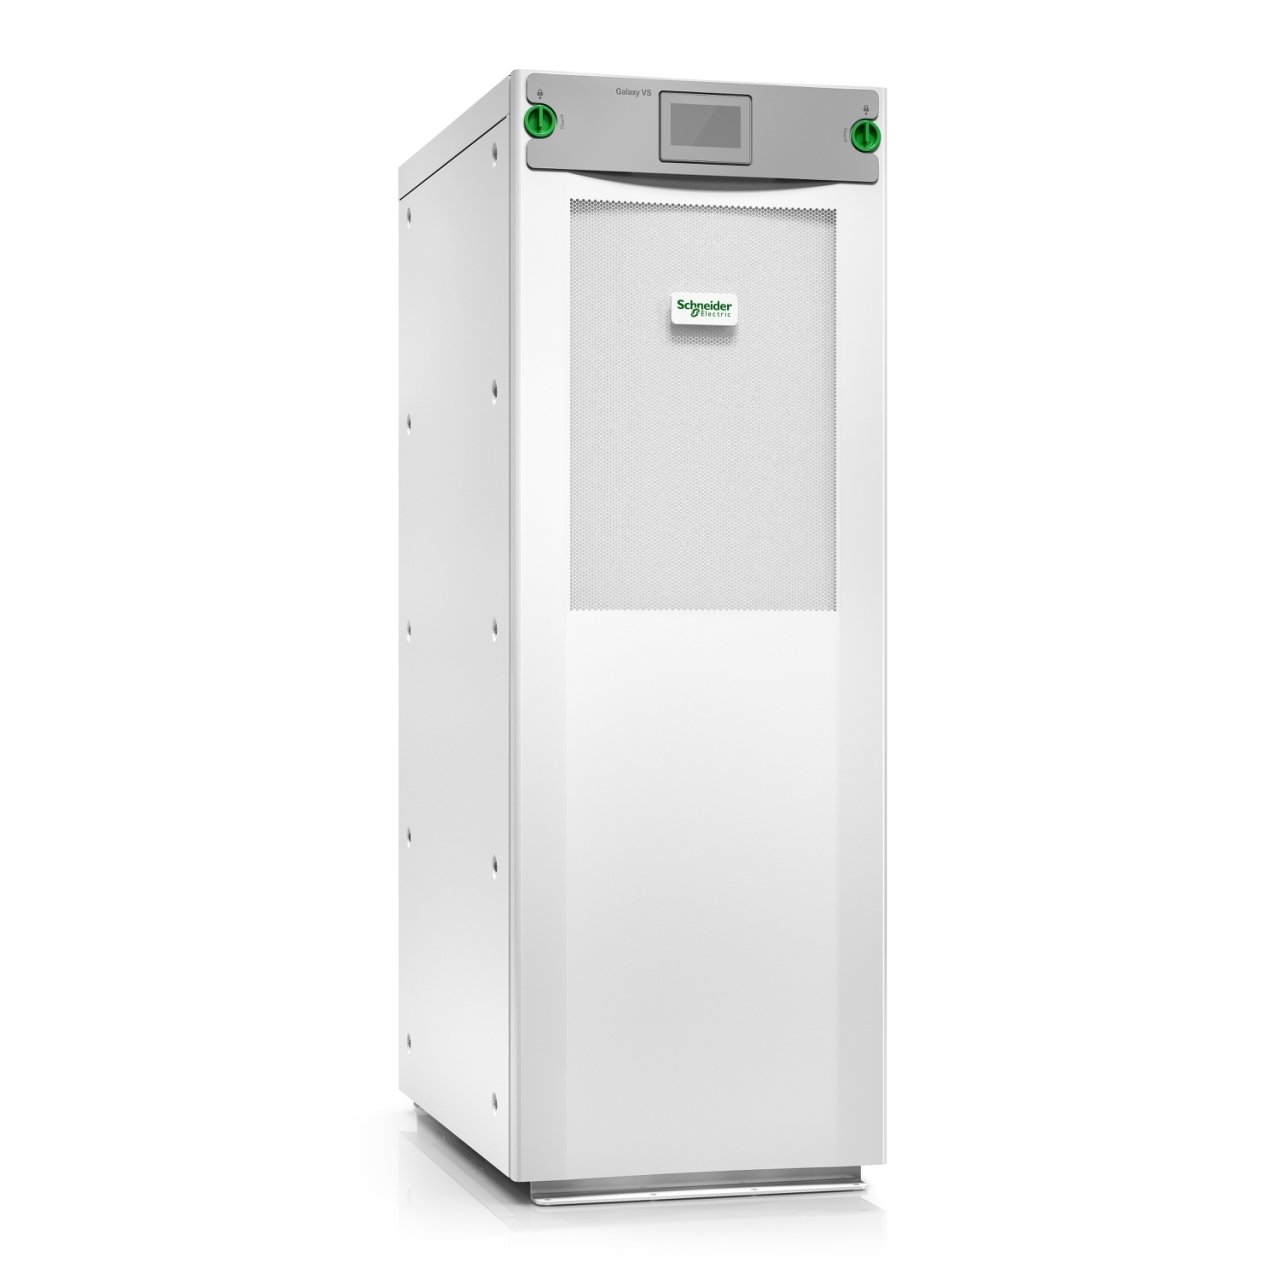 Galaxy VS UPS 20kW 208V with N+1 power module, for 5 smart modular 9Ah battery strings, Start-up 5x8